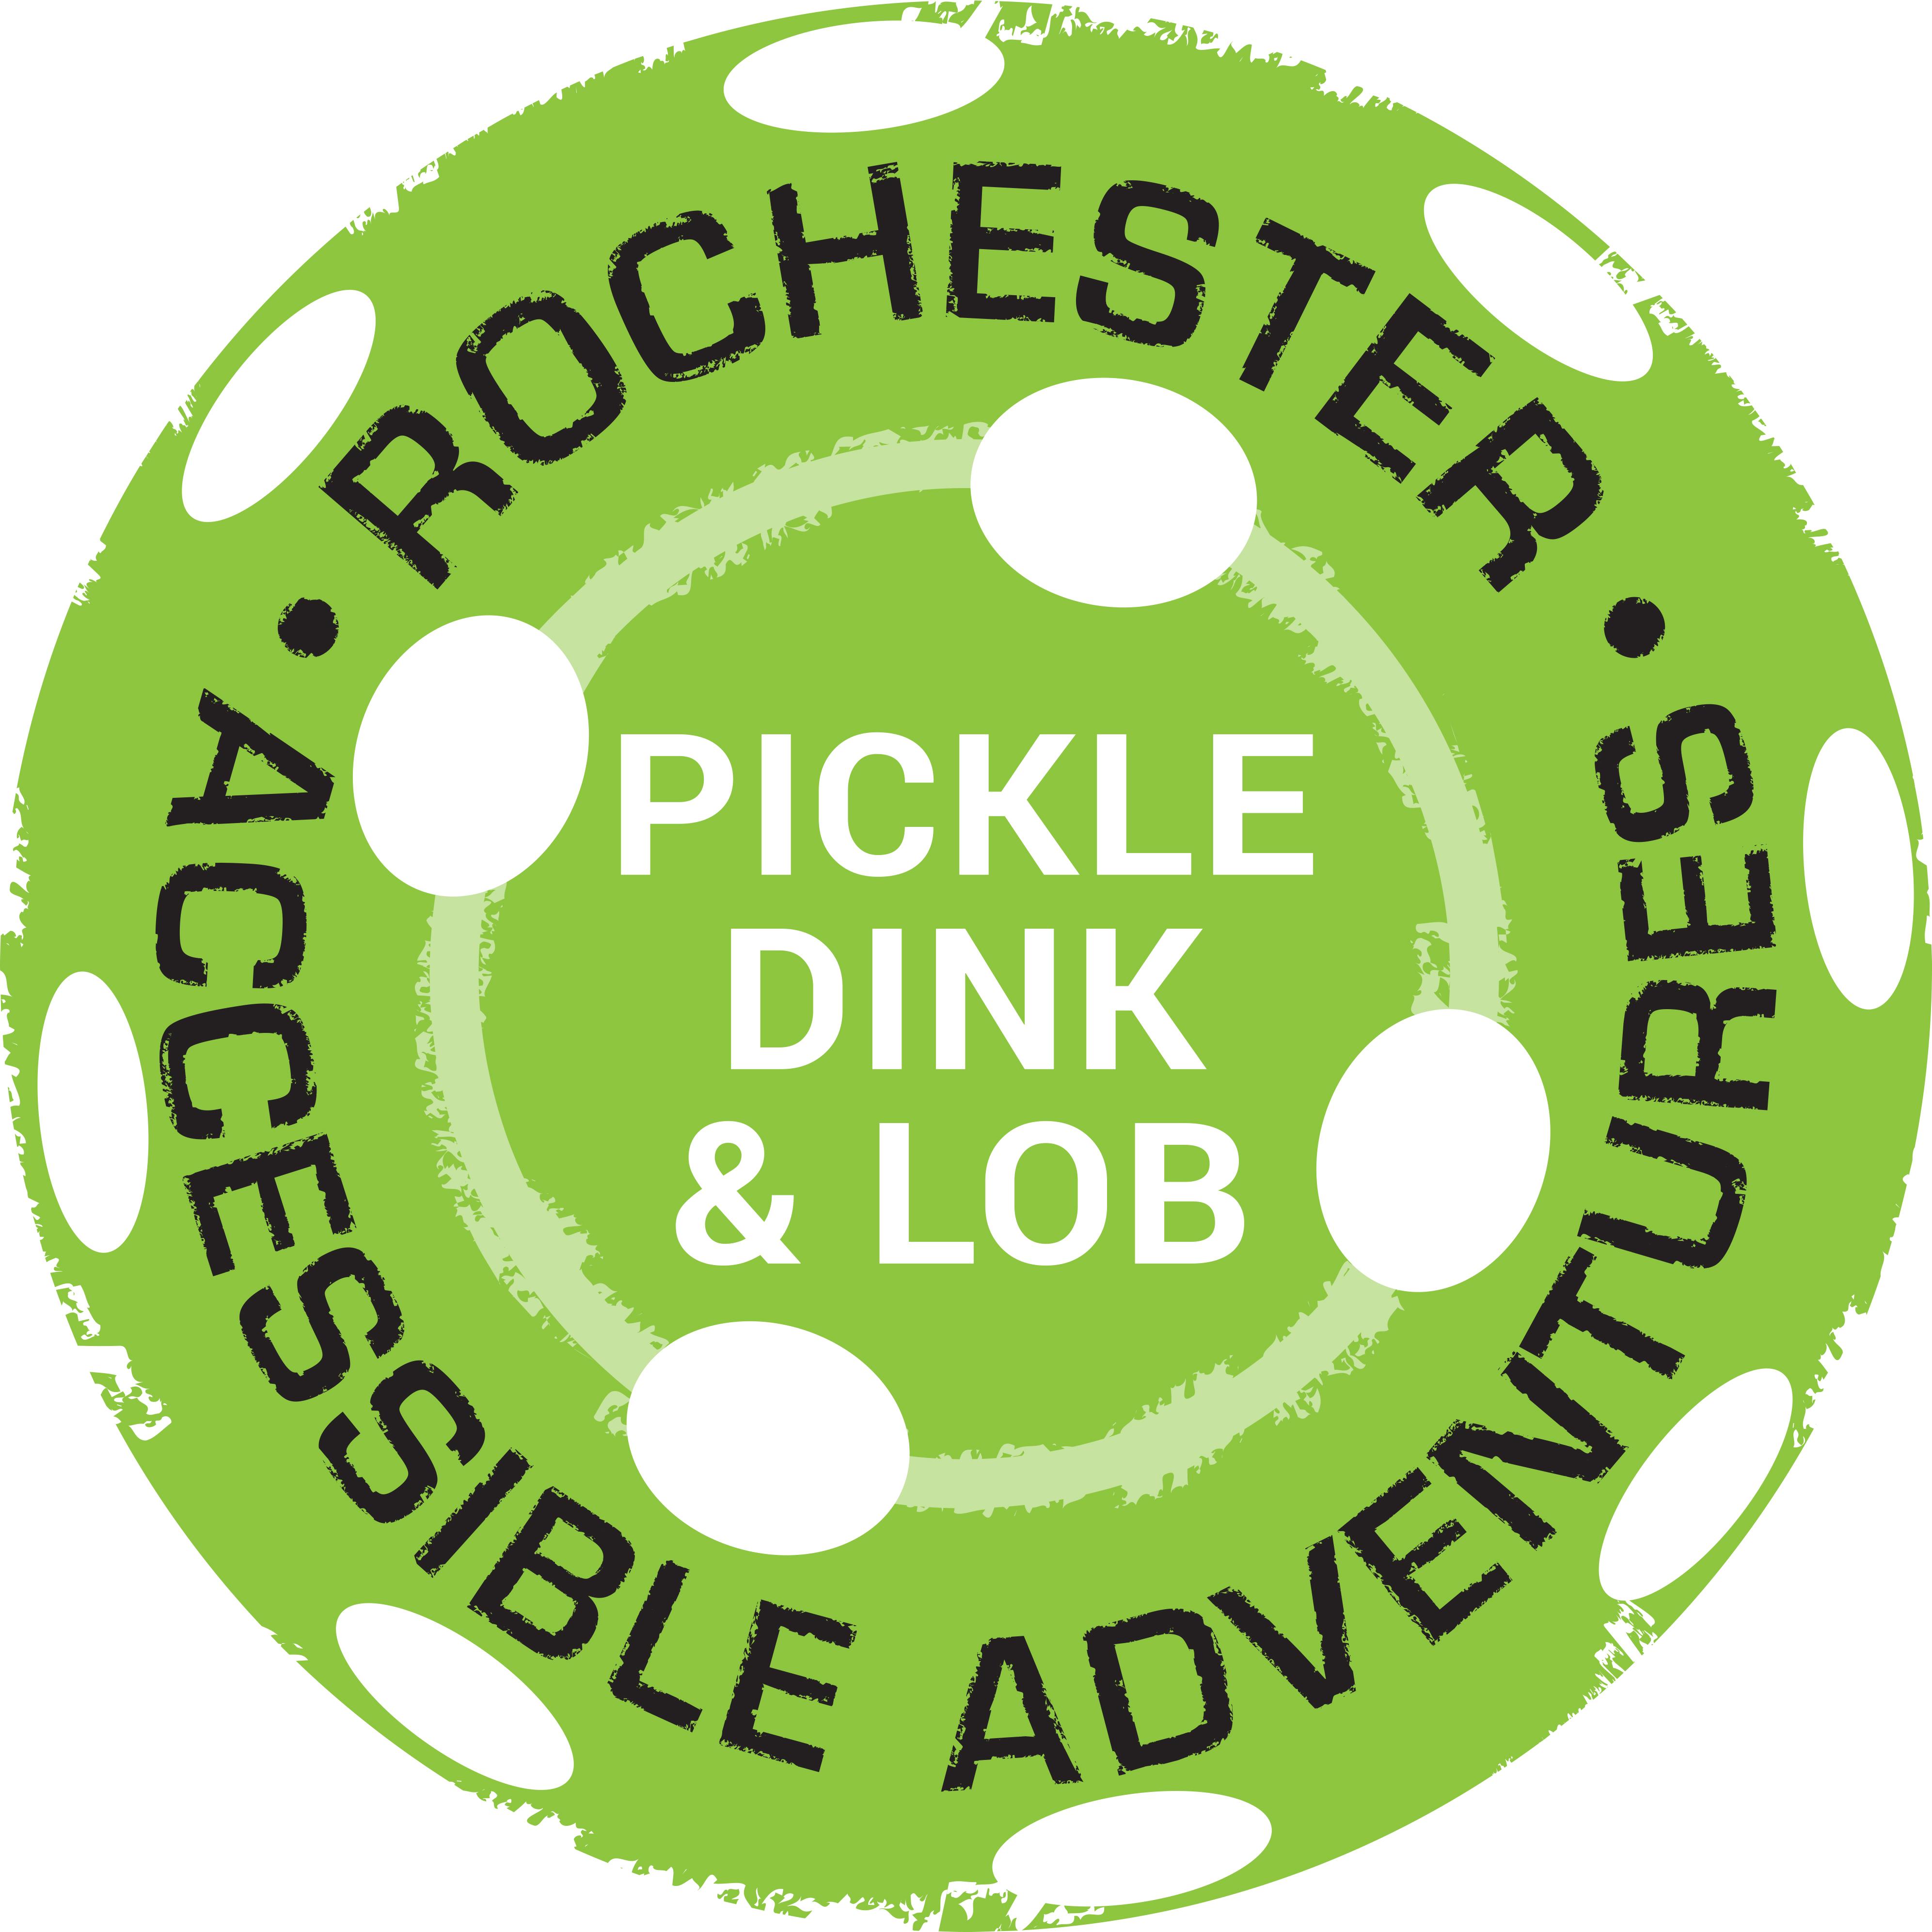 A green pickleball with white holes; "Rochester Accessible Adventures" around the outer ring, "Pickle Dink & Lob" on the inside